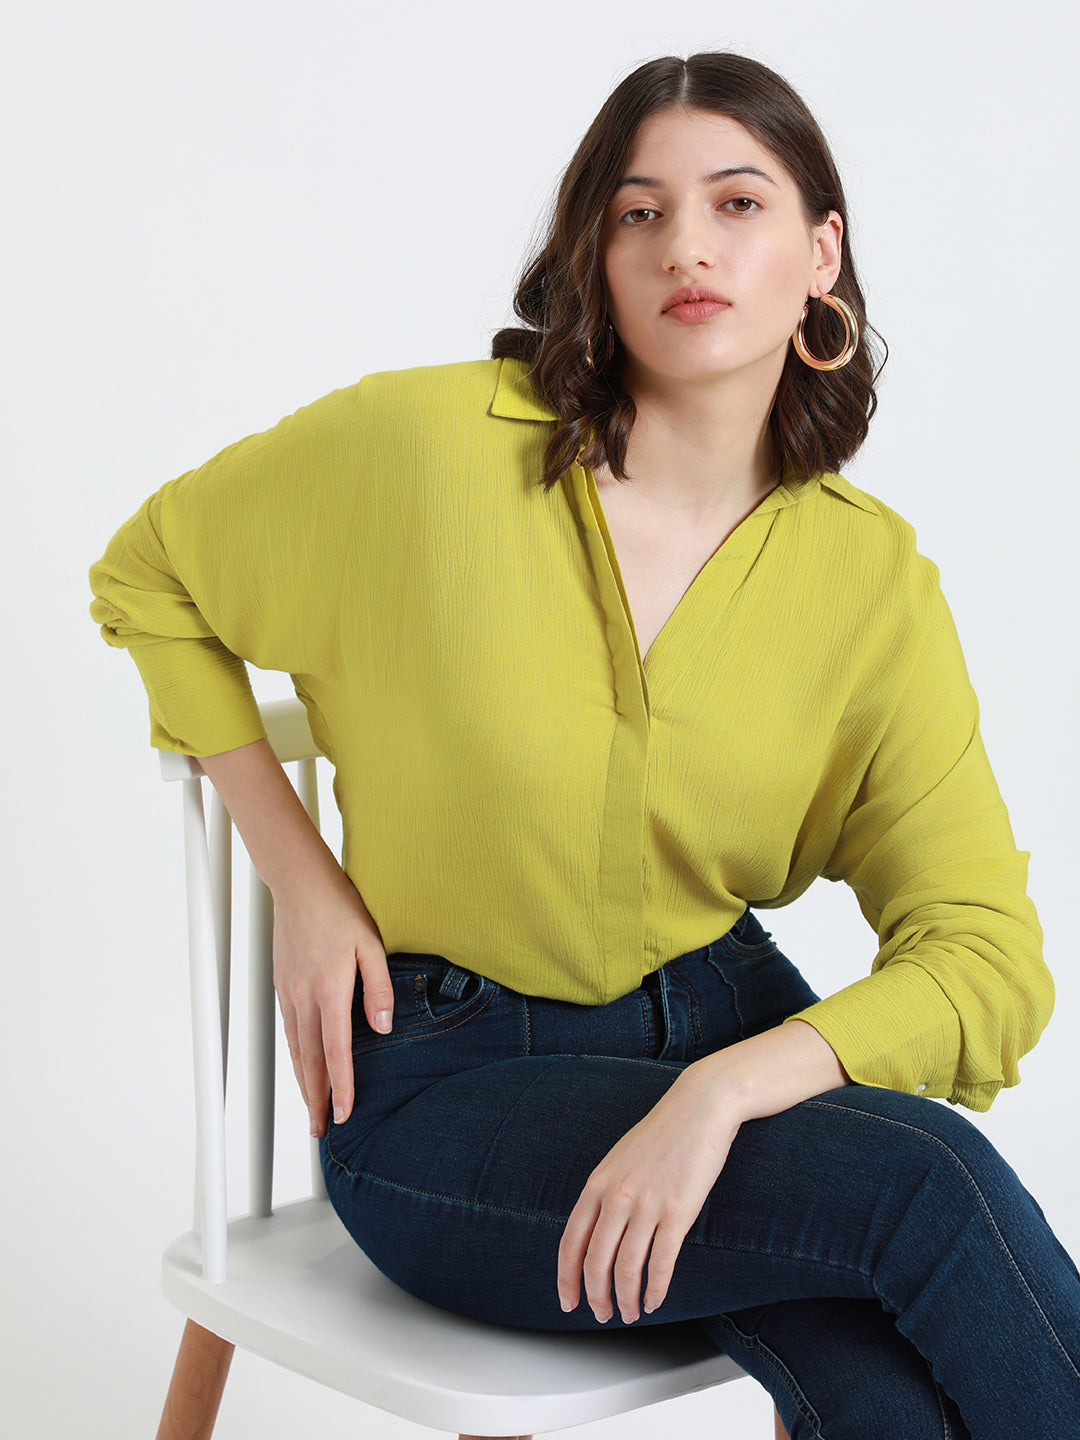 DL Woman Shirt Collar Relaxed Fit Solid Lime Green Shirt